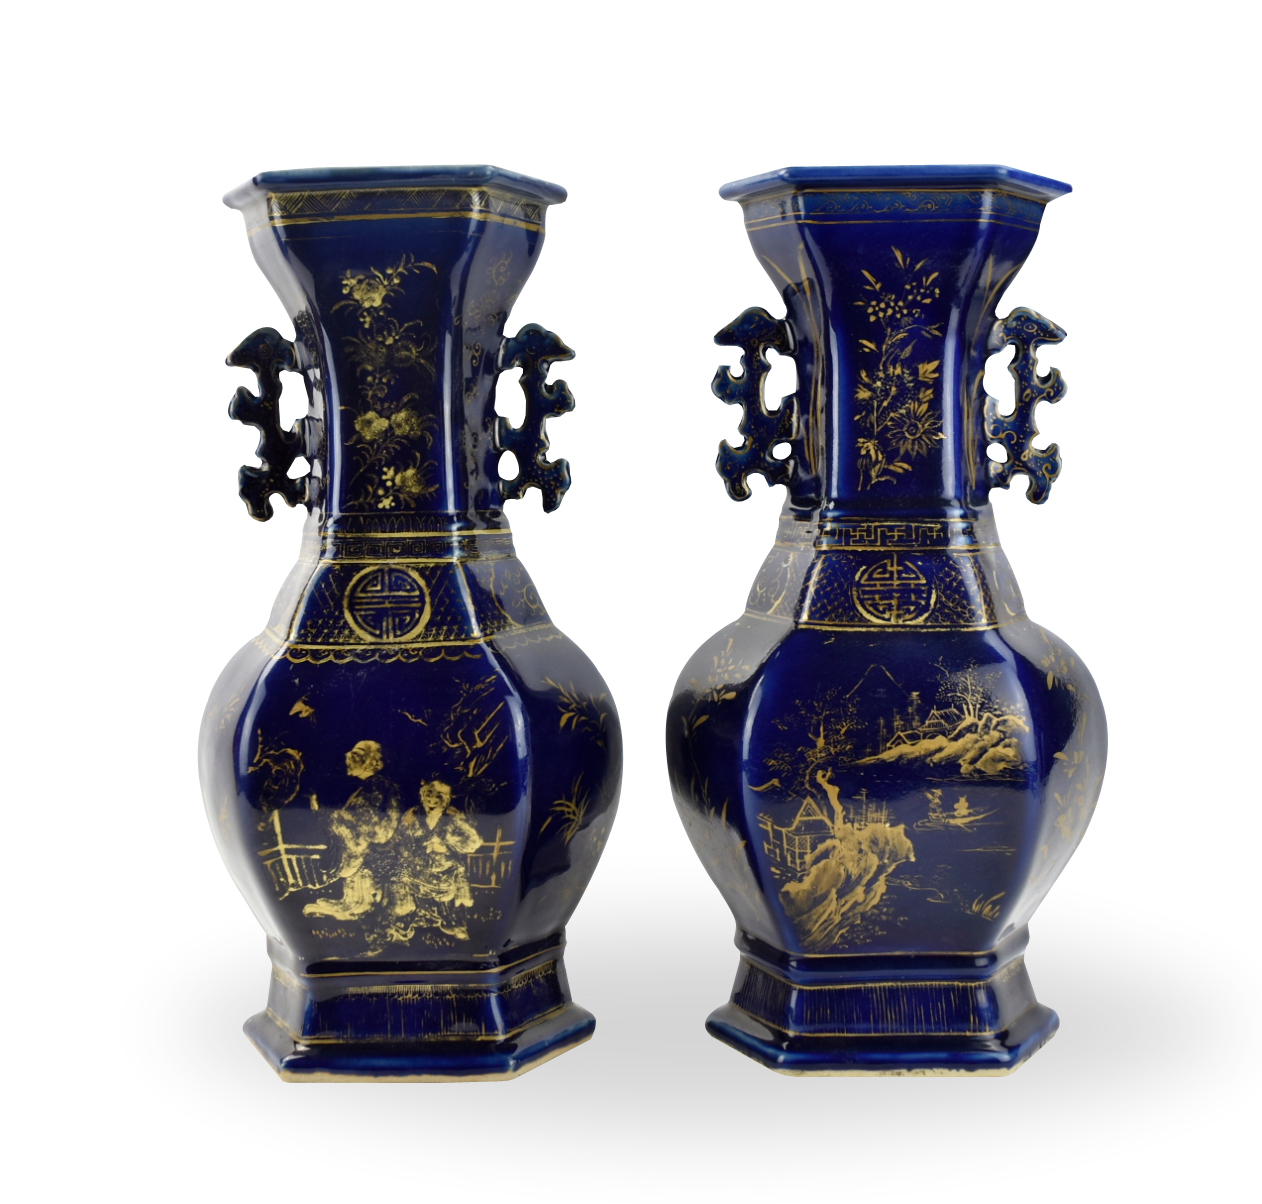 PAIR OF LARGE CHINESE GILT BLUE